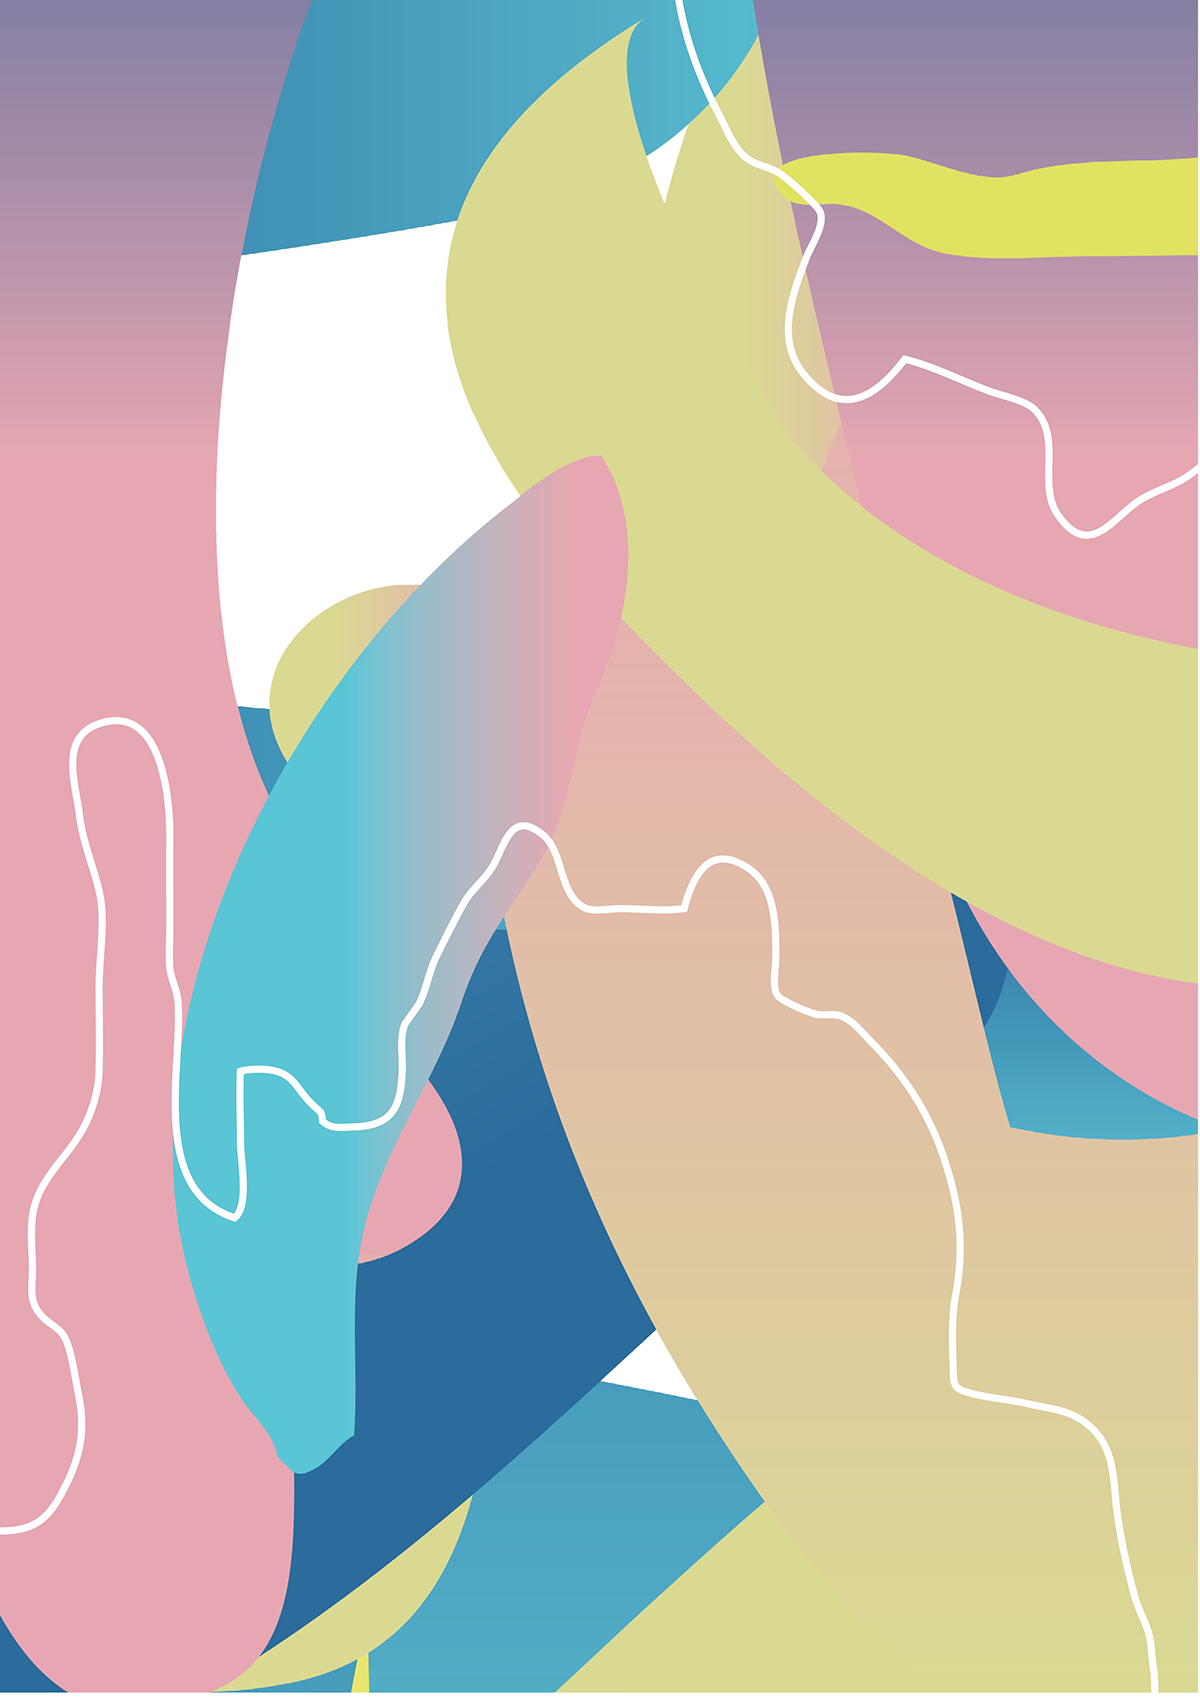 #madethis  #Colossal #adobe #forms   #colours #typography #illustration #Gradient   #graphicDesign